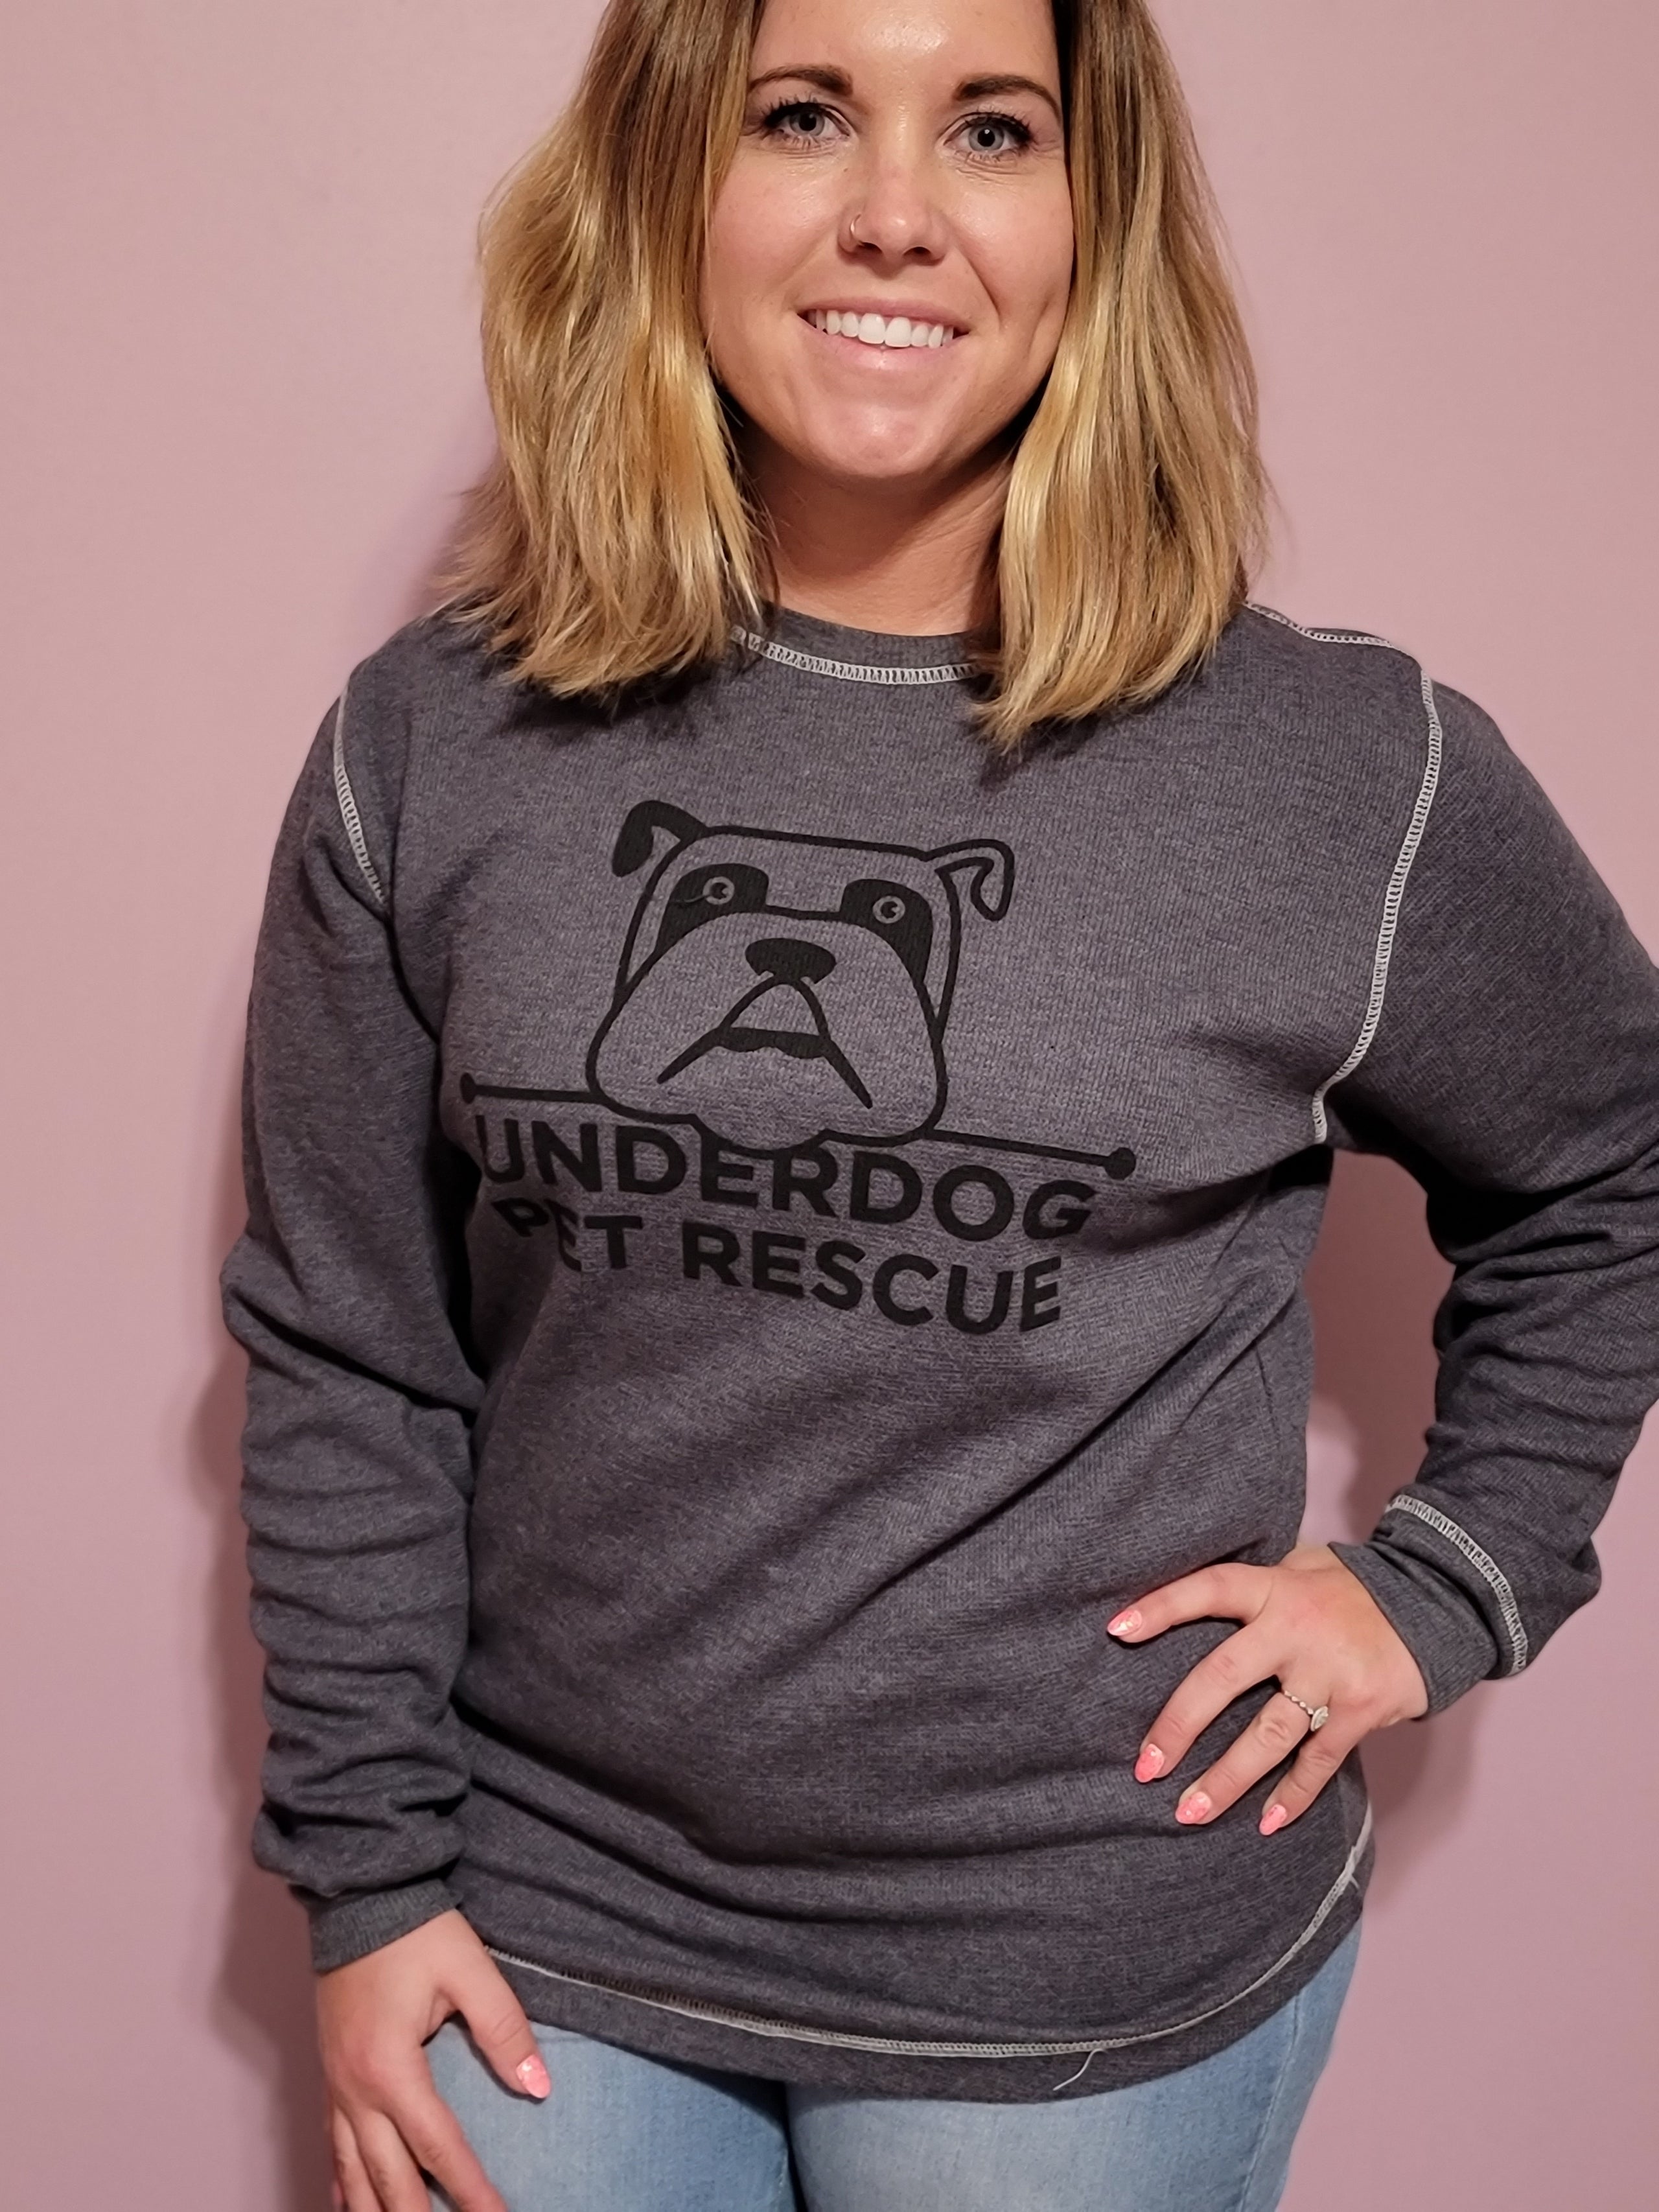 Home  Underdog Pet Rescue of Wisconsin, Inc.